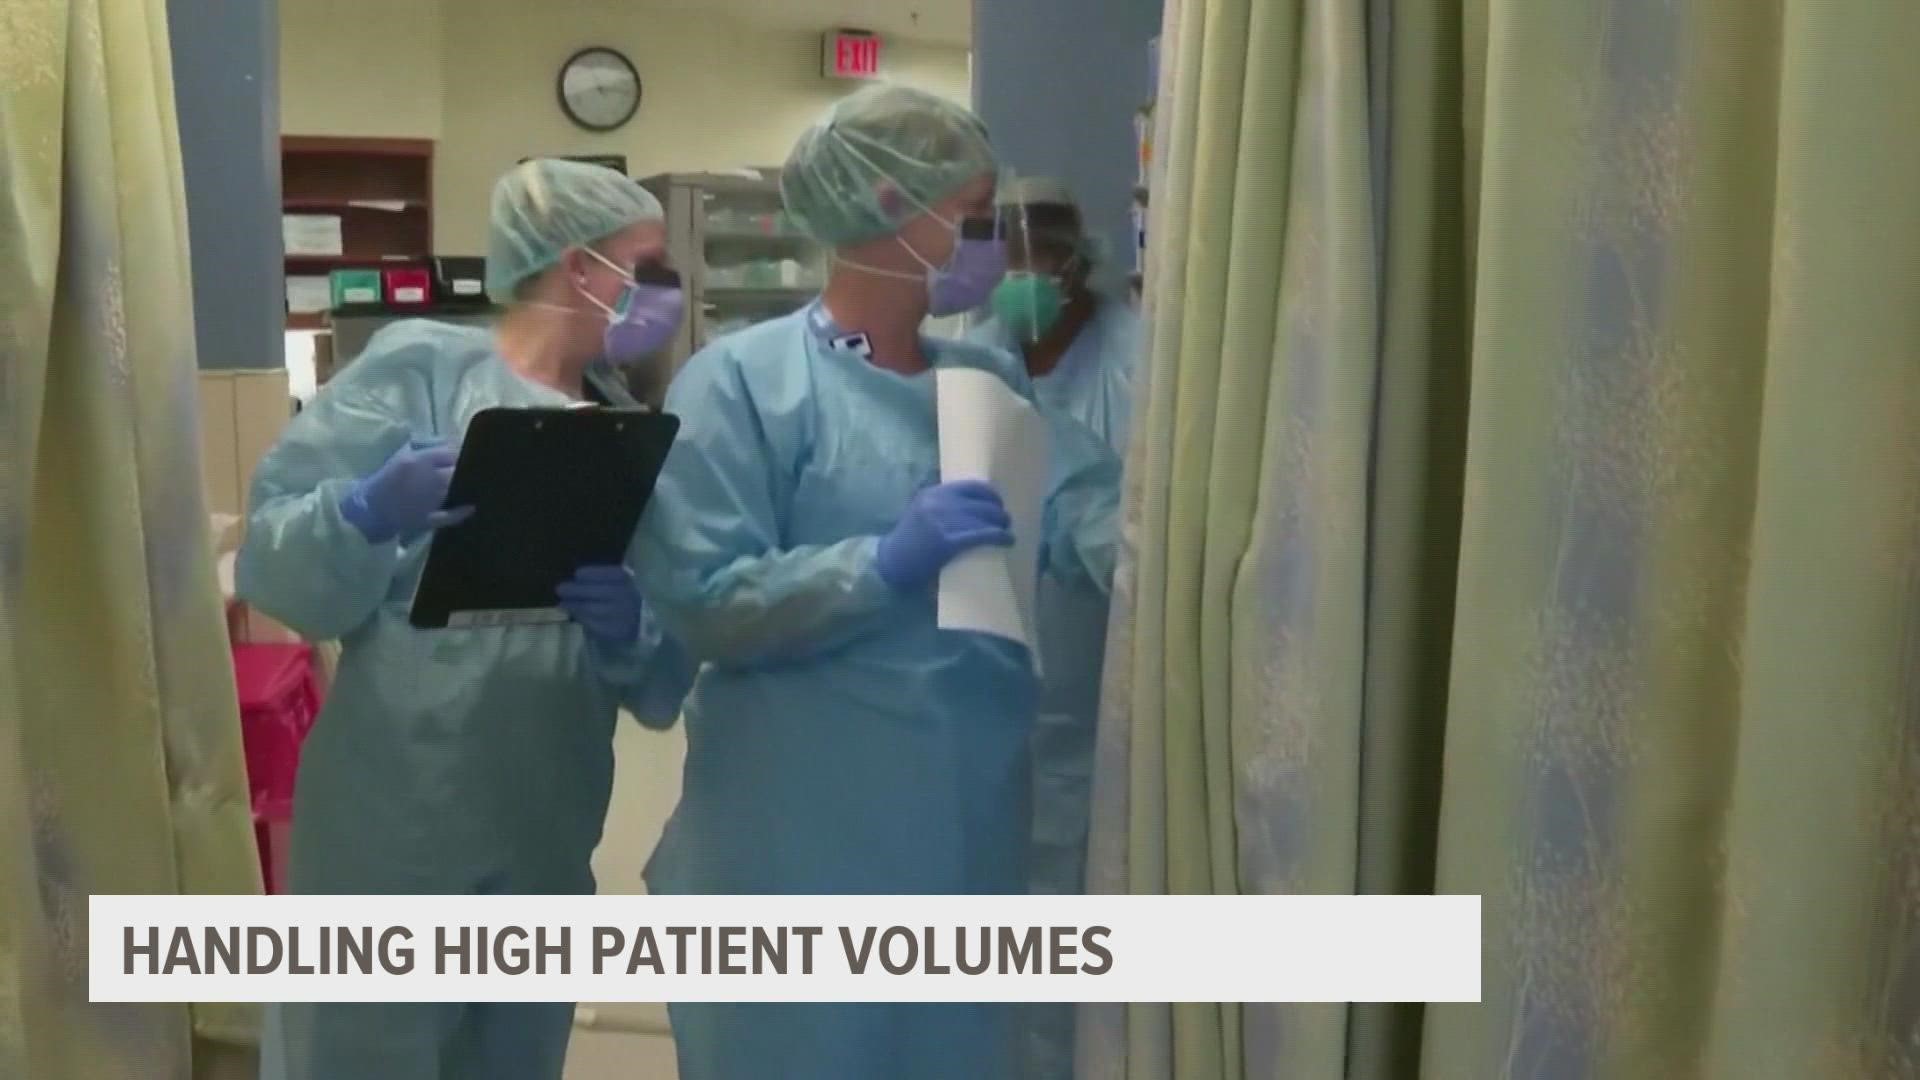 A doctor at a metro hospital said it's tough dealing with high patient volumes, but protocols at her facility are making the situation more manageable.